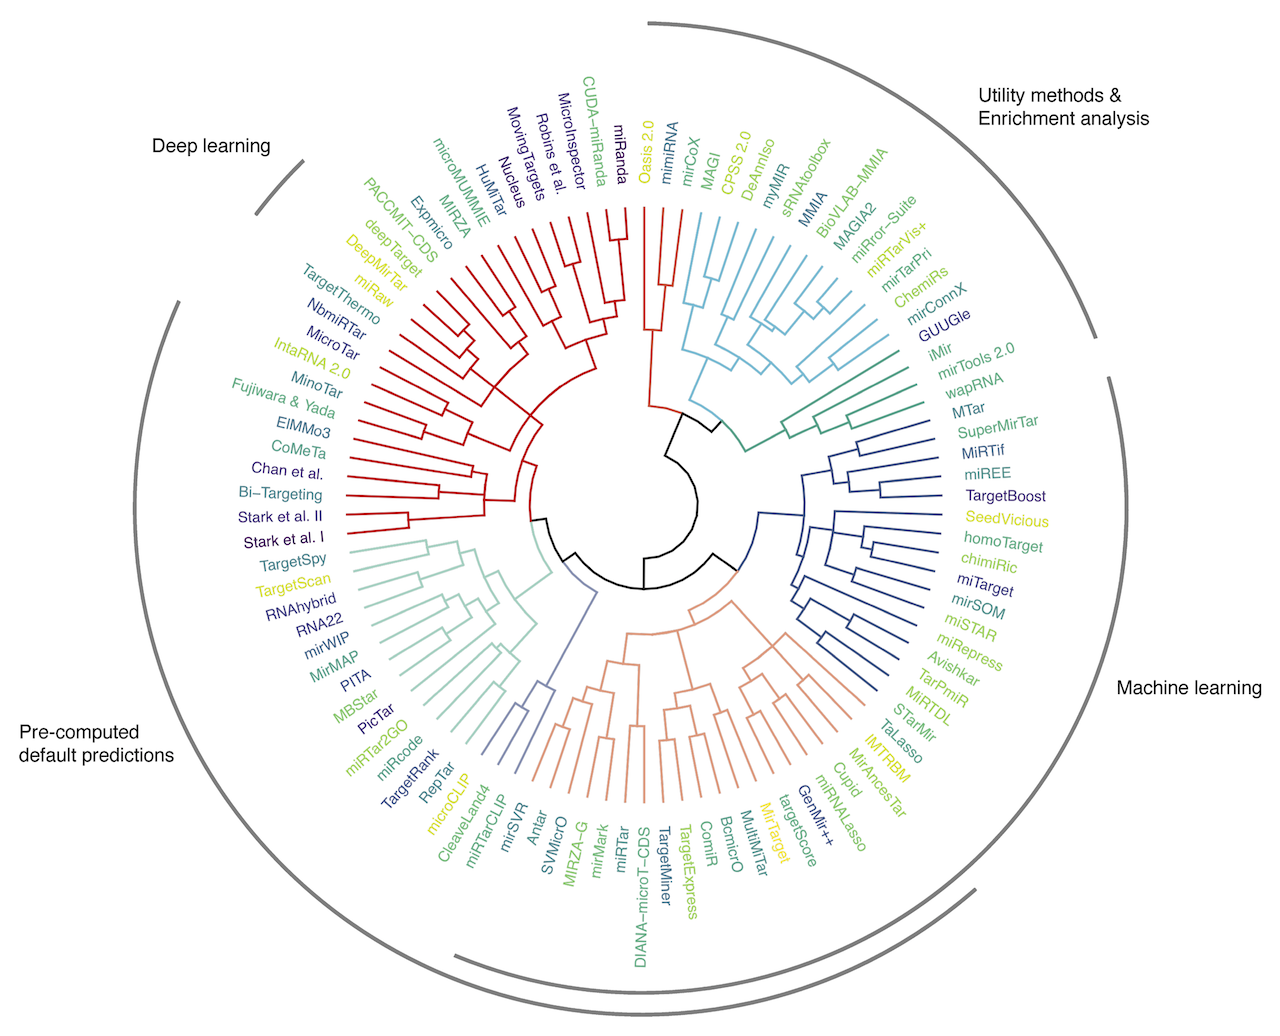 Polar tree dendrogram of the hierarchical clustering of microRNA-target prediction tools.